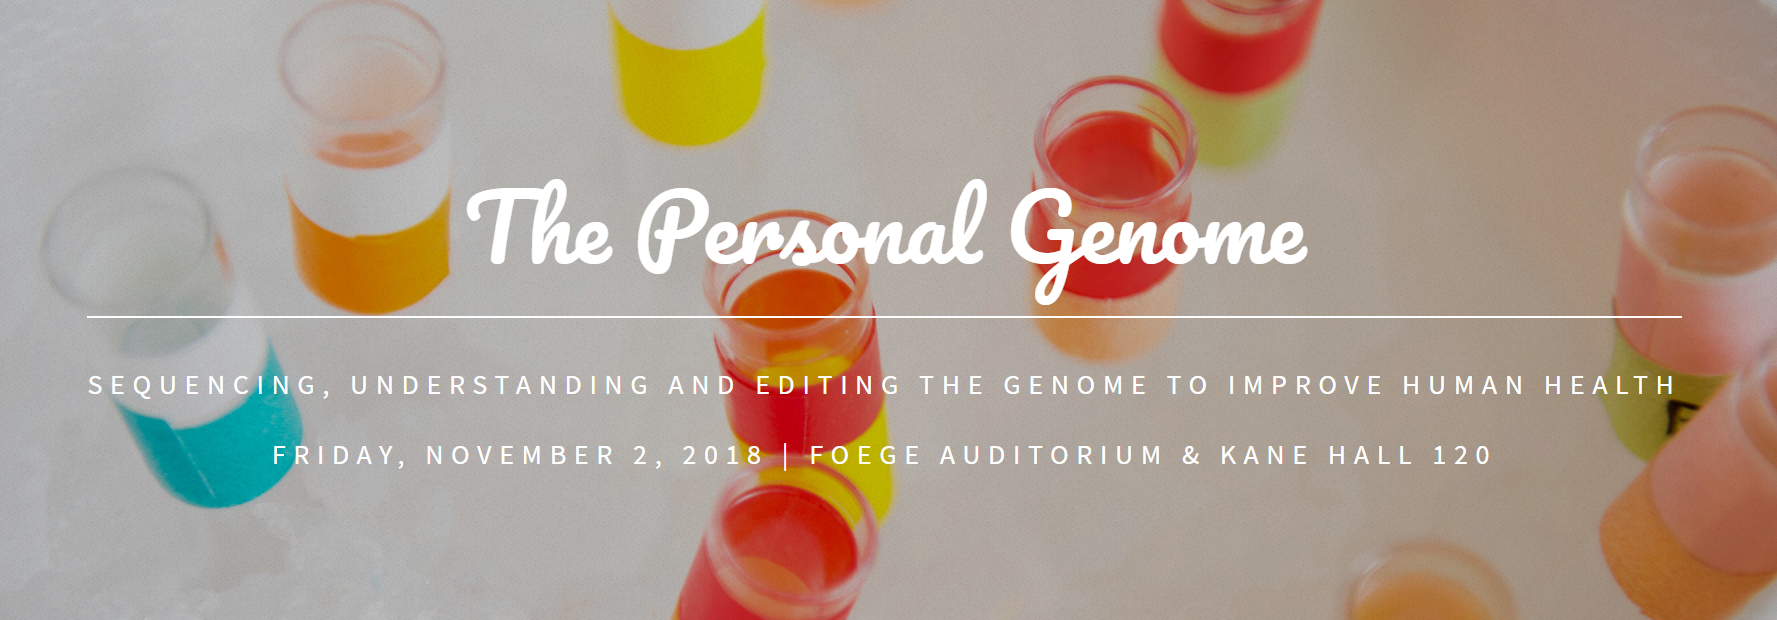 The Personal Genome